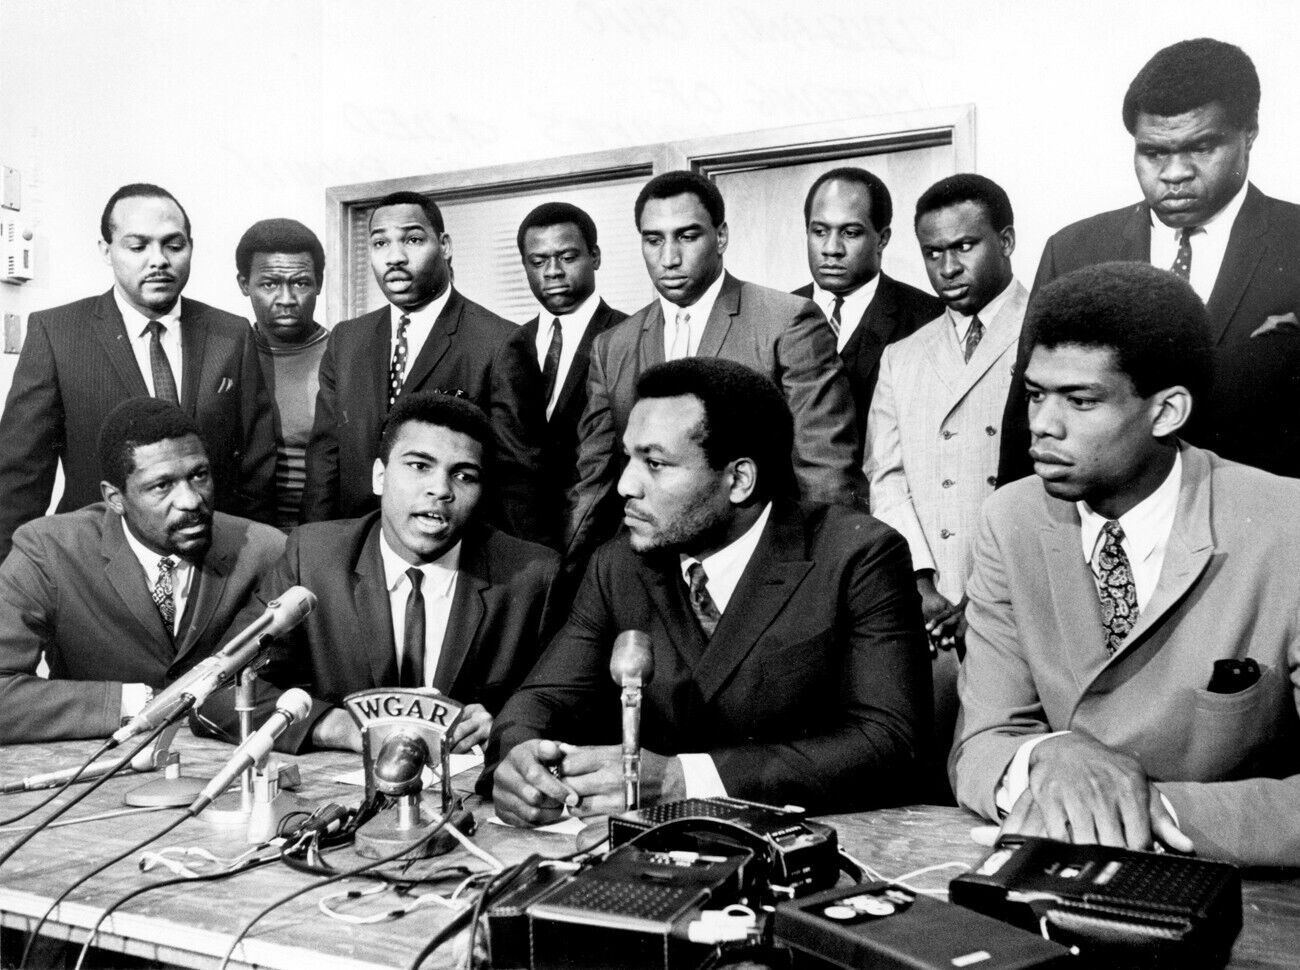 Athletes Jim Brown Mohammad Ali Civil Rights Summit Picture Photo Print 13